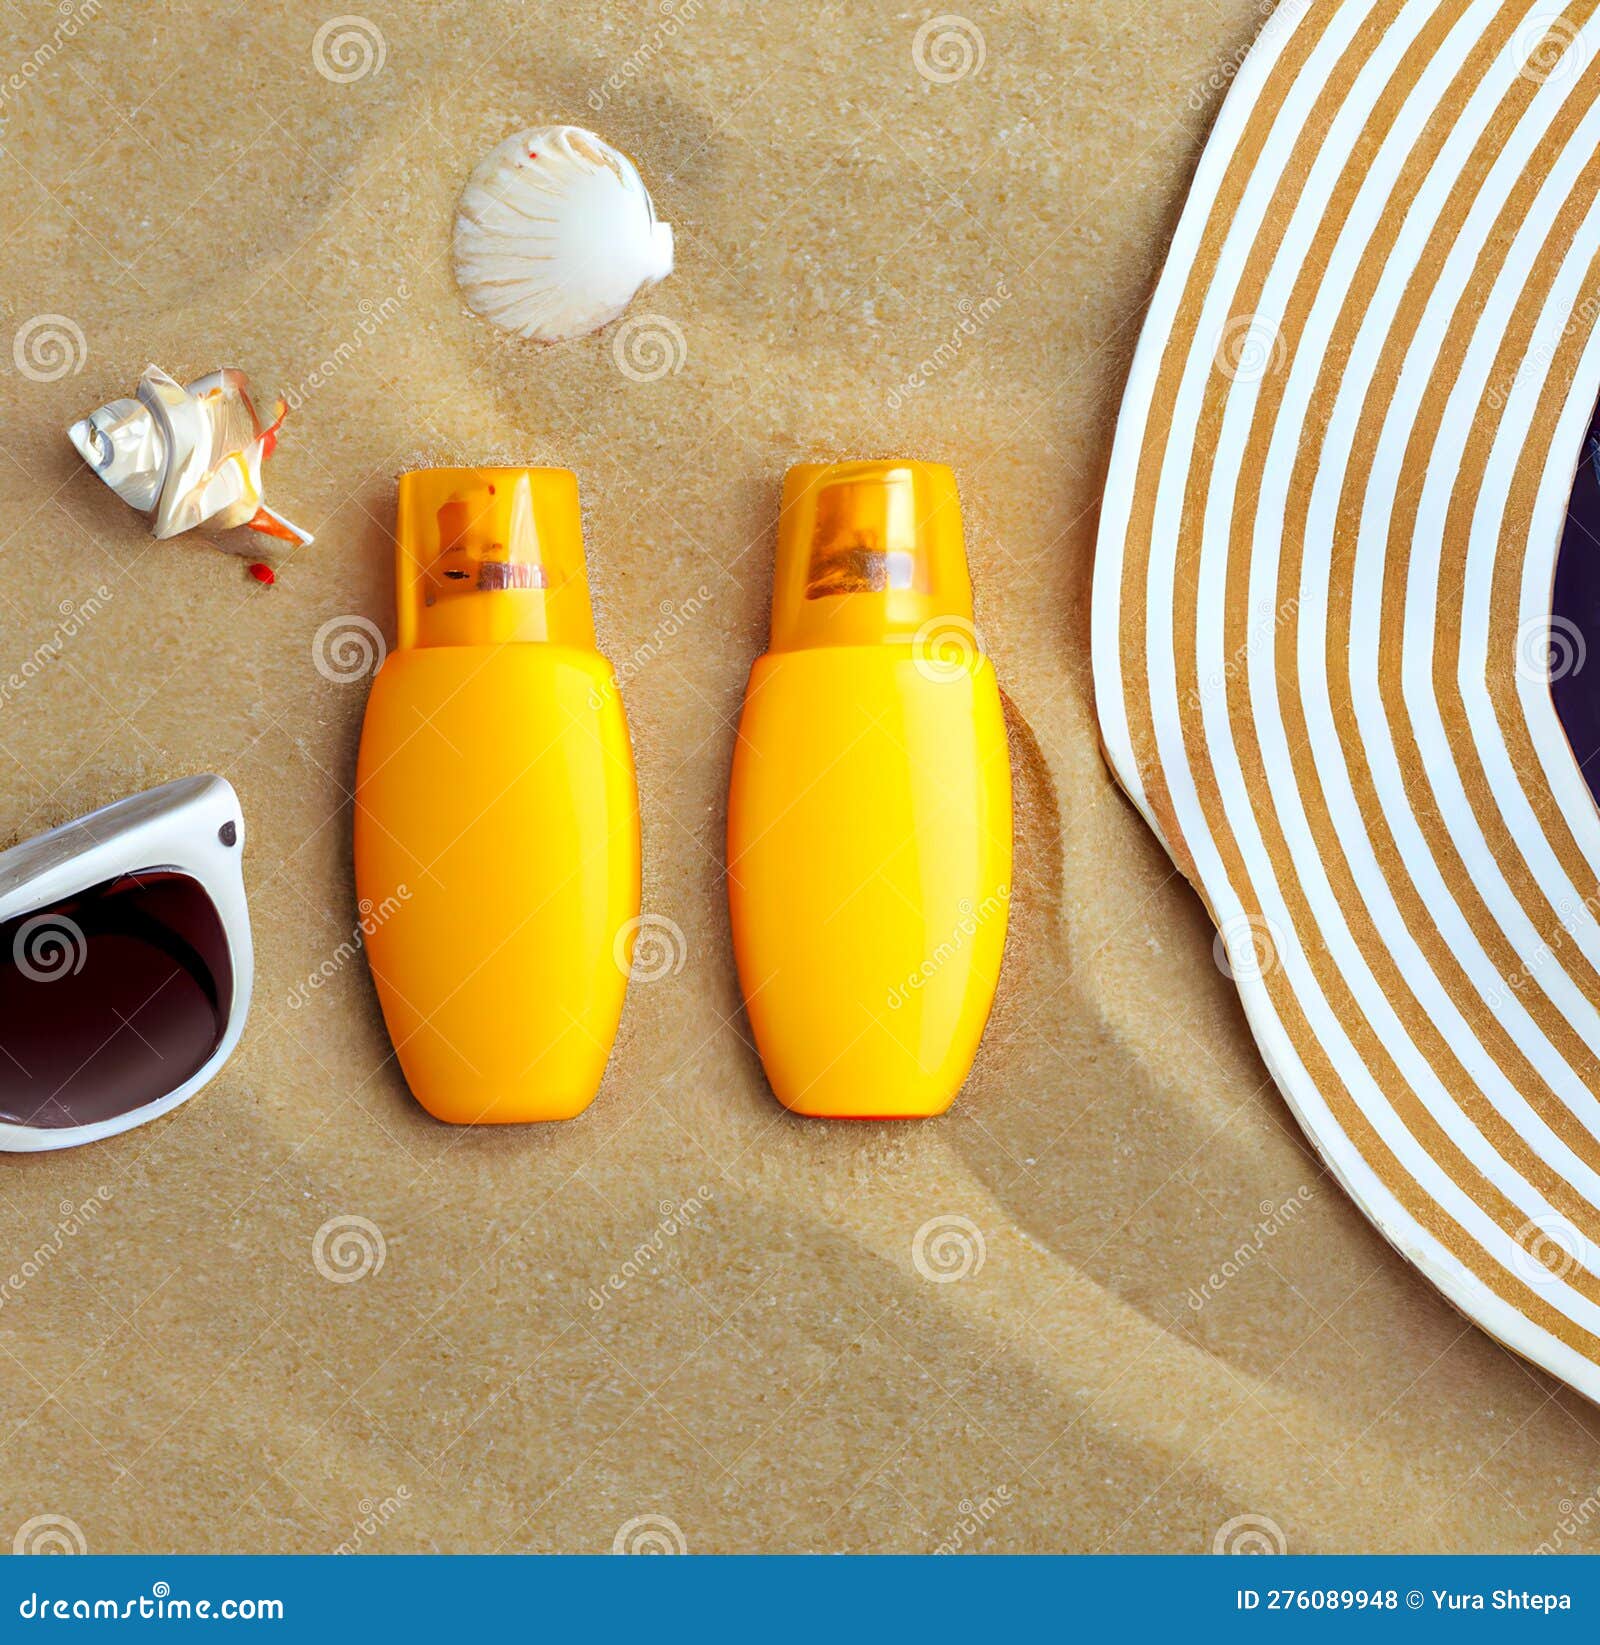 A Pair of Sunglasses and a Pair of Sunglasses Sit on a Sand Surface ...